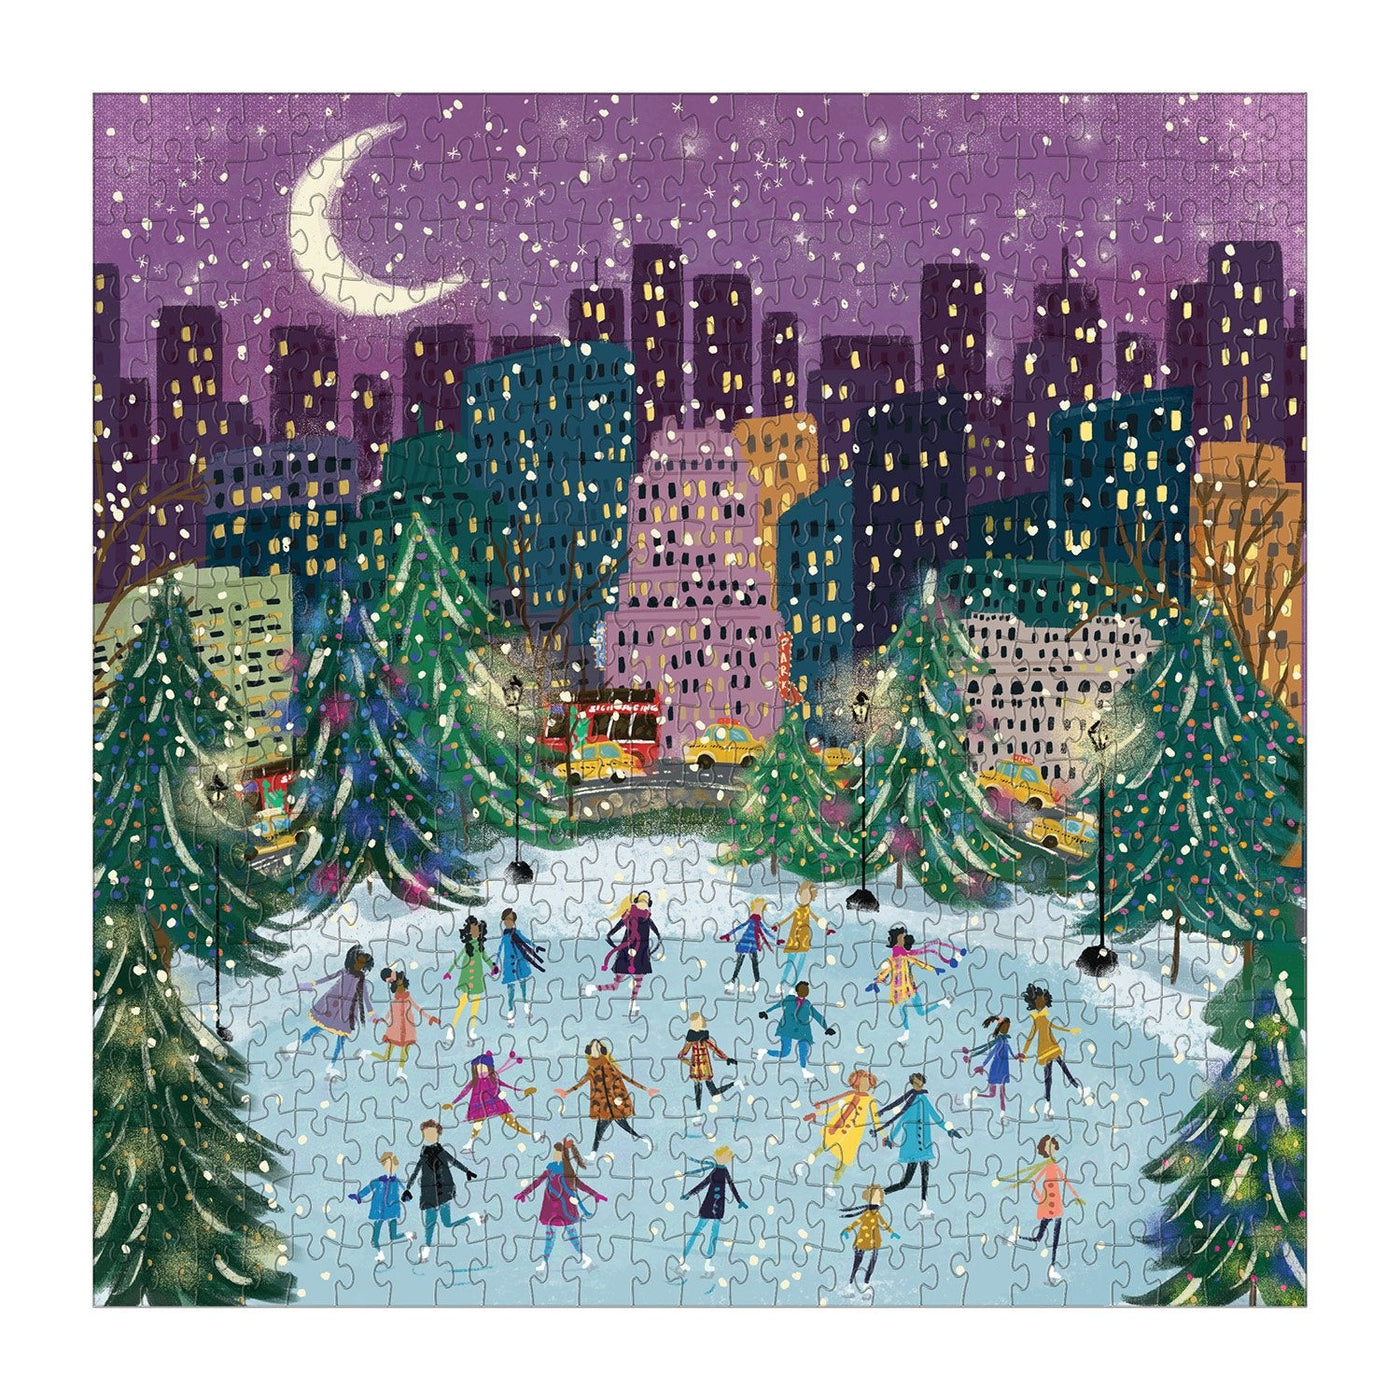 Merry Moonlight Skaters | 500 Piece Jigsaw Puzzle